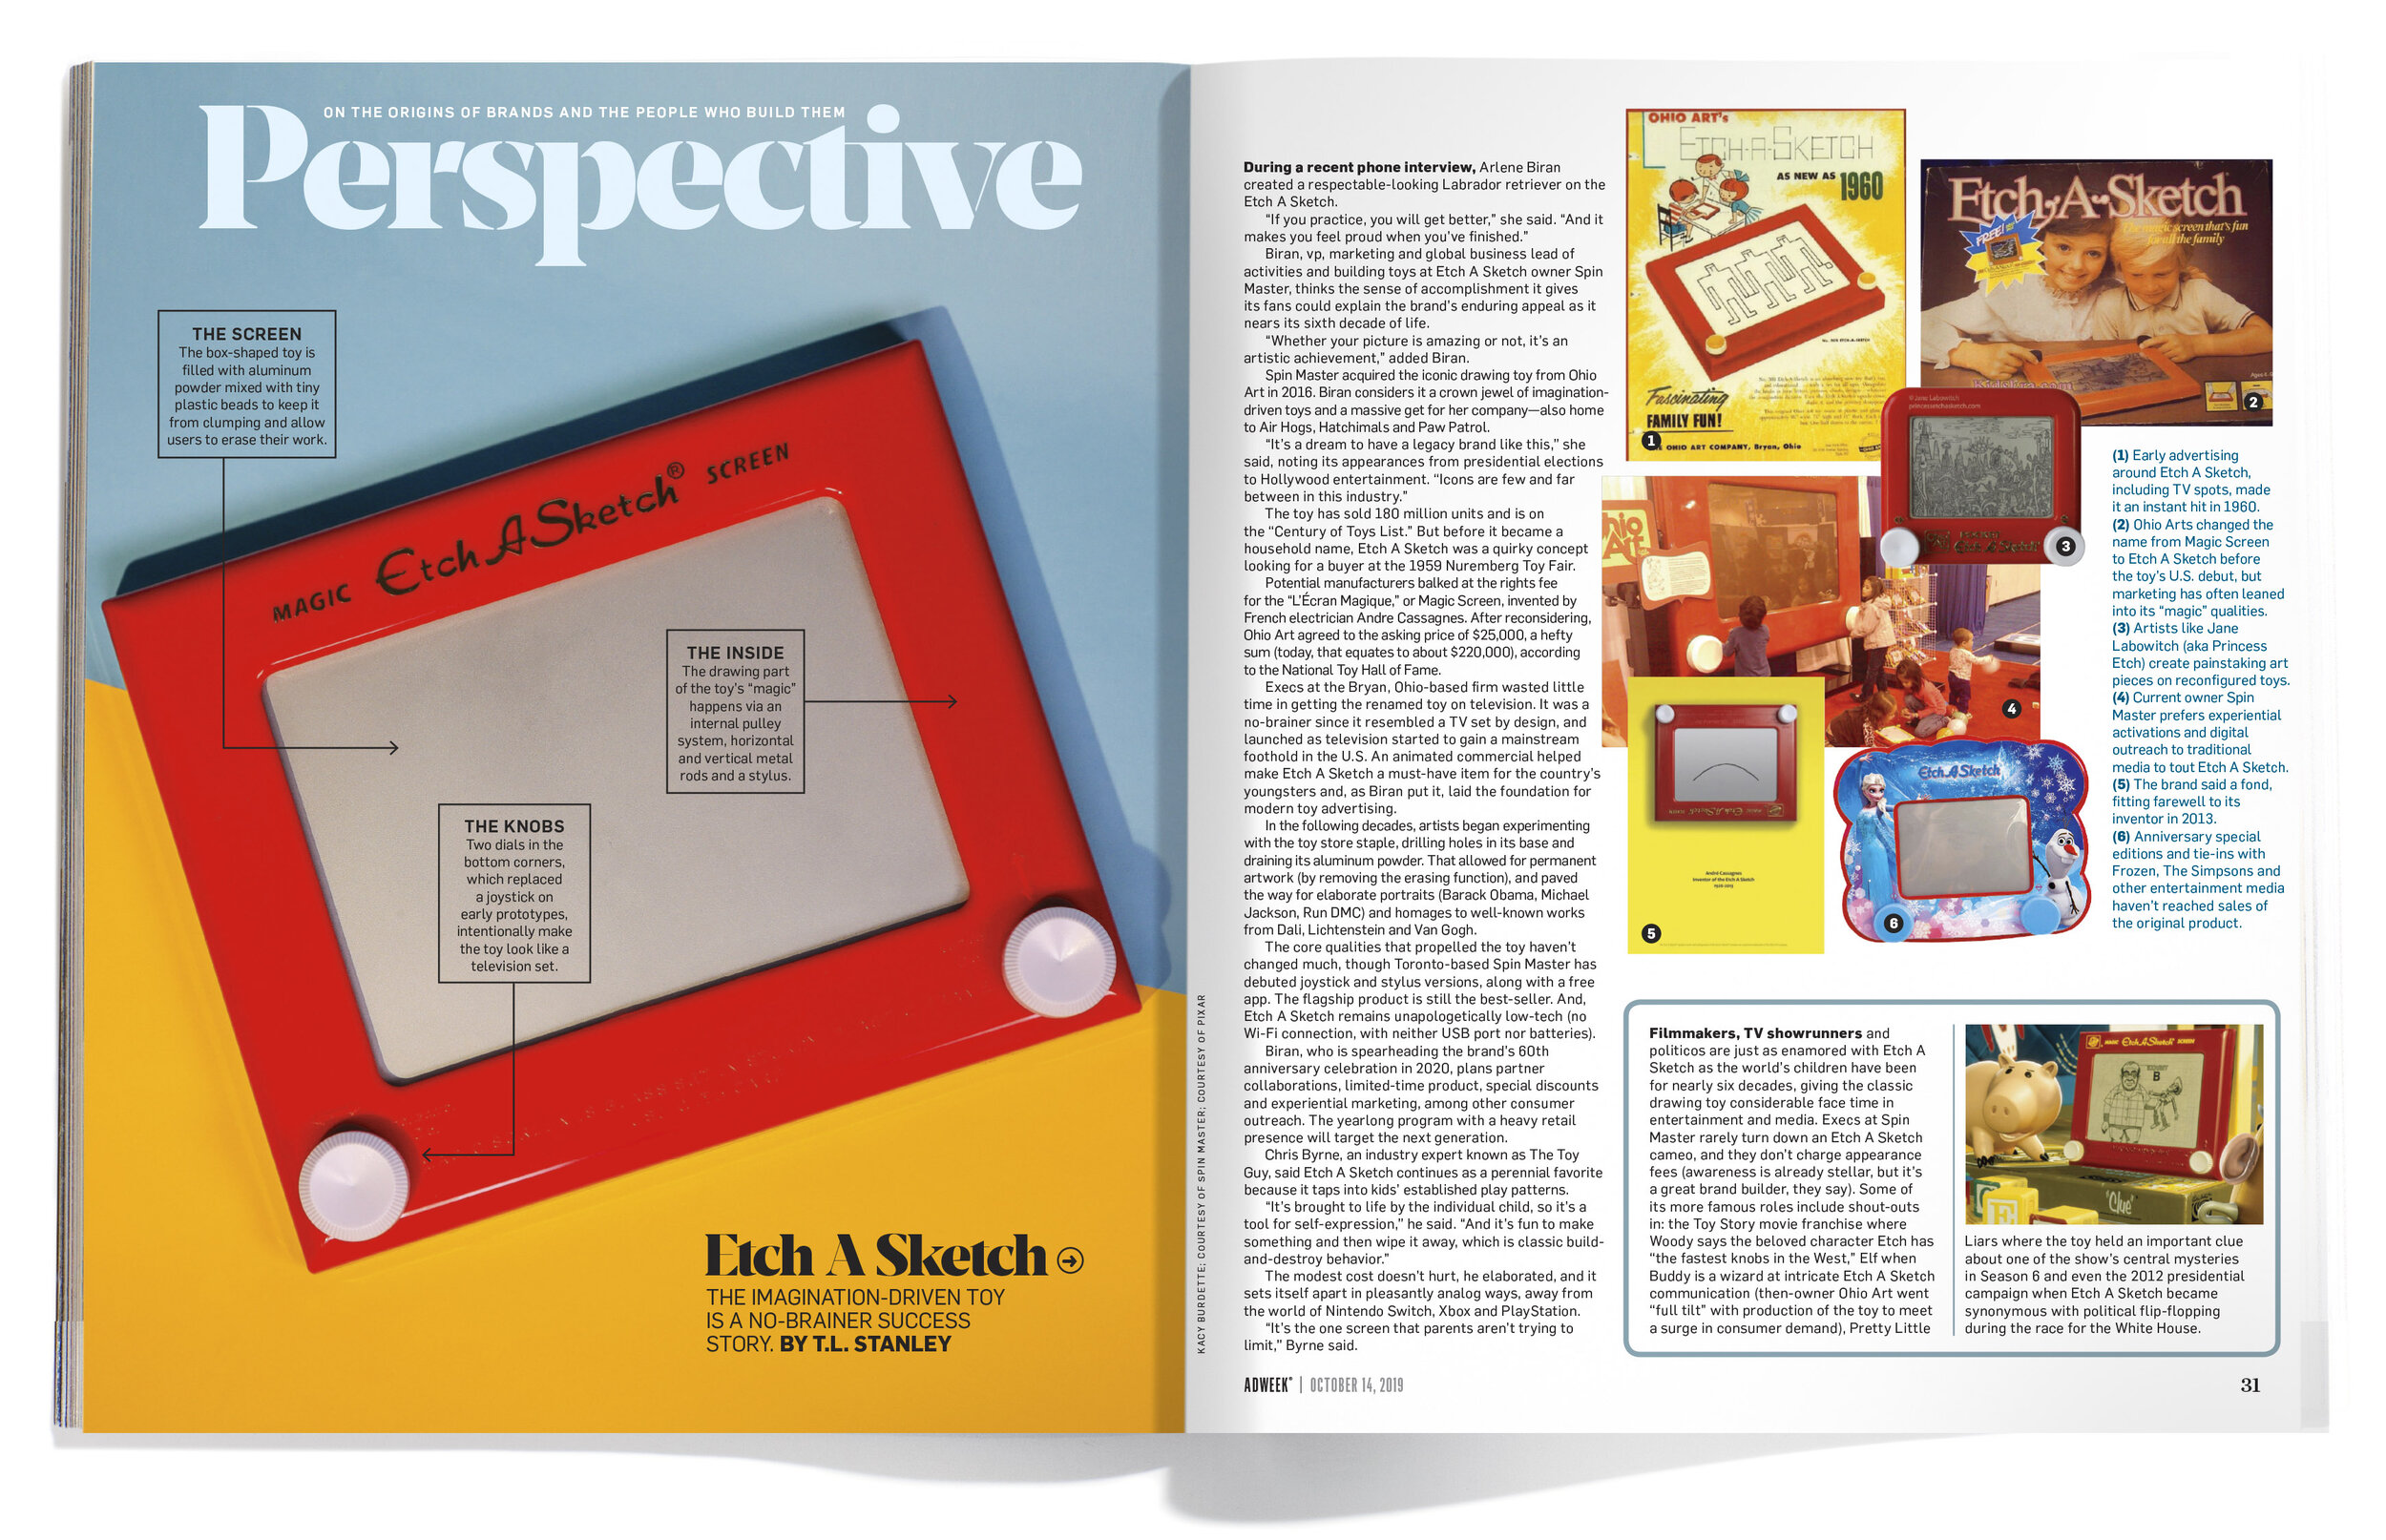   Adweek    The ‘Magic’ Behind Drawing and Erasing on Etch A Sketch . 